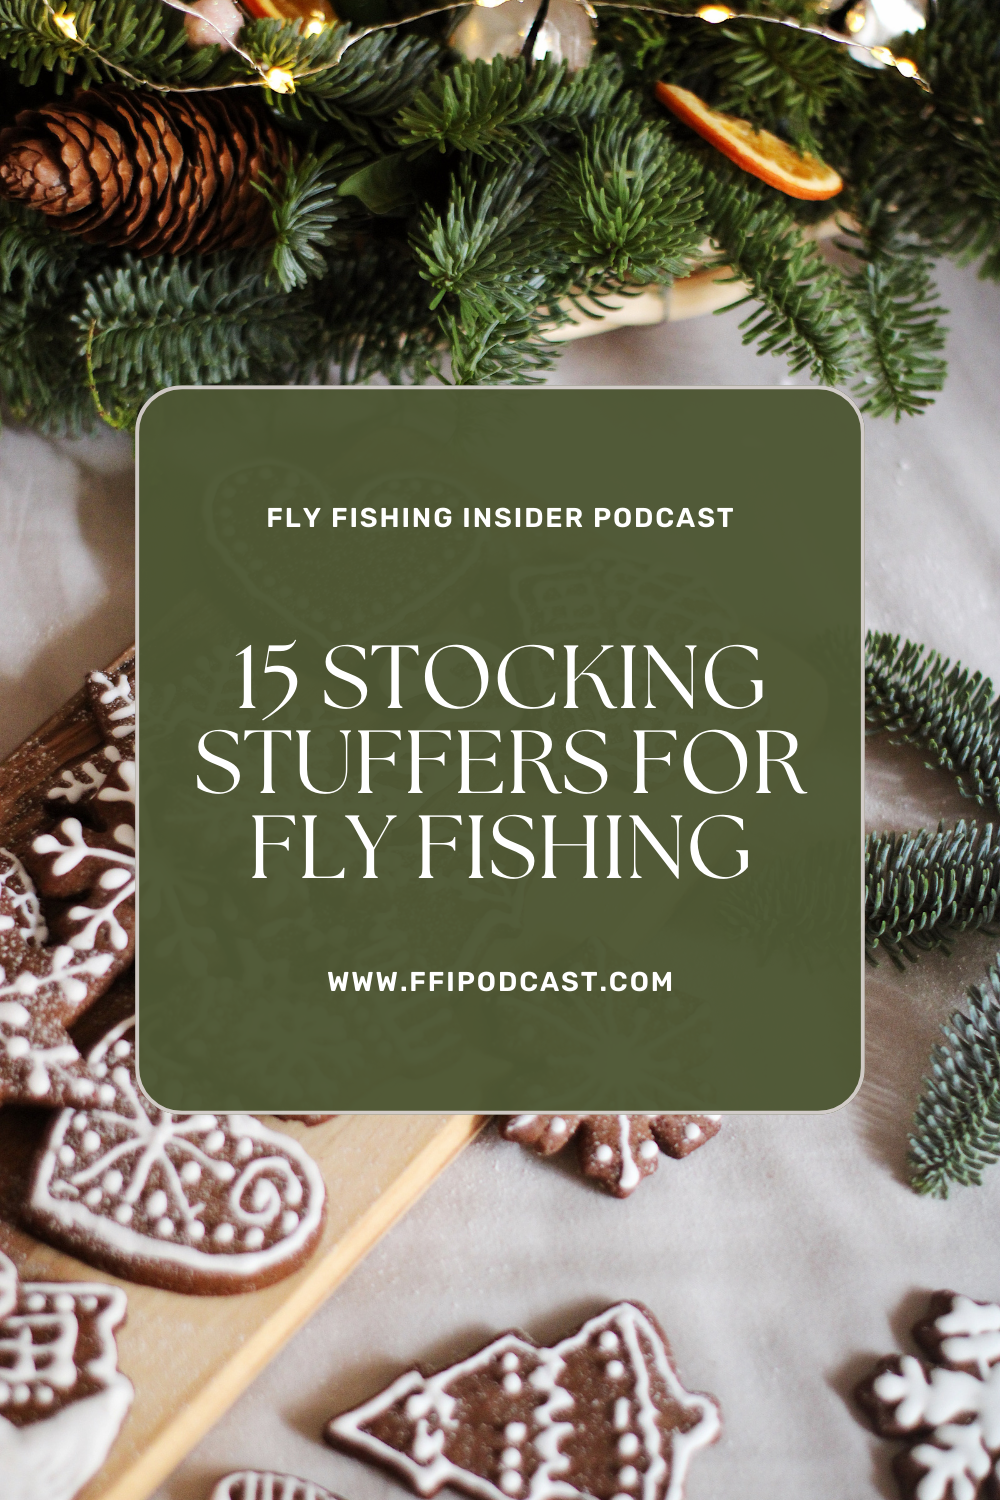 Fly Fishing Stocking Stuffers - Fly Fishing Insider Podcast